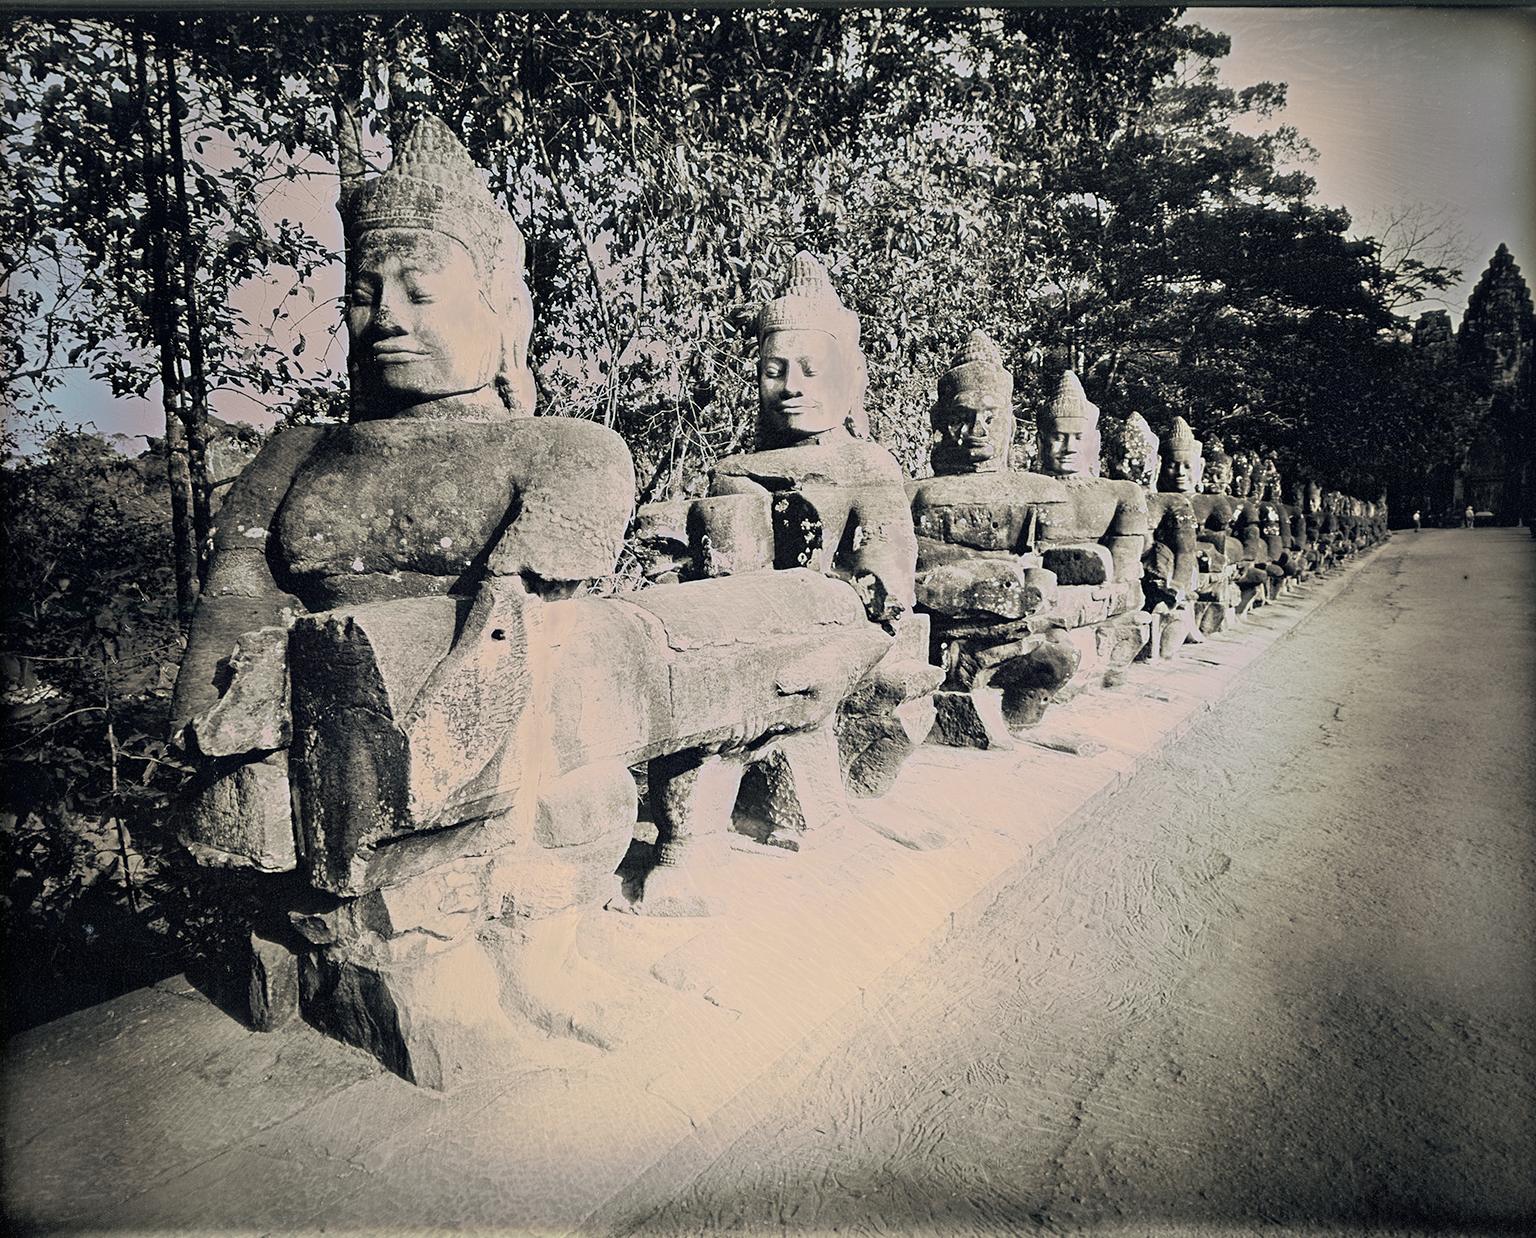 Binh Danh Landscape Photograph - "Entrance to Angkor Thom" daguerreotype on silver buddha statues trees